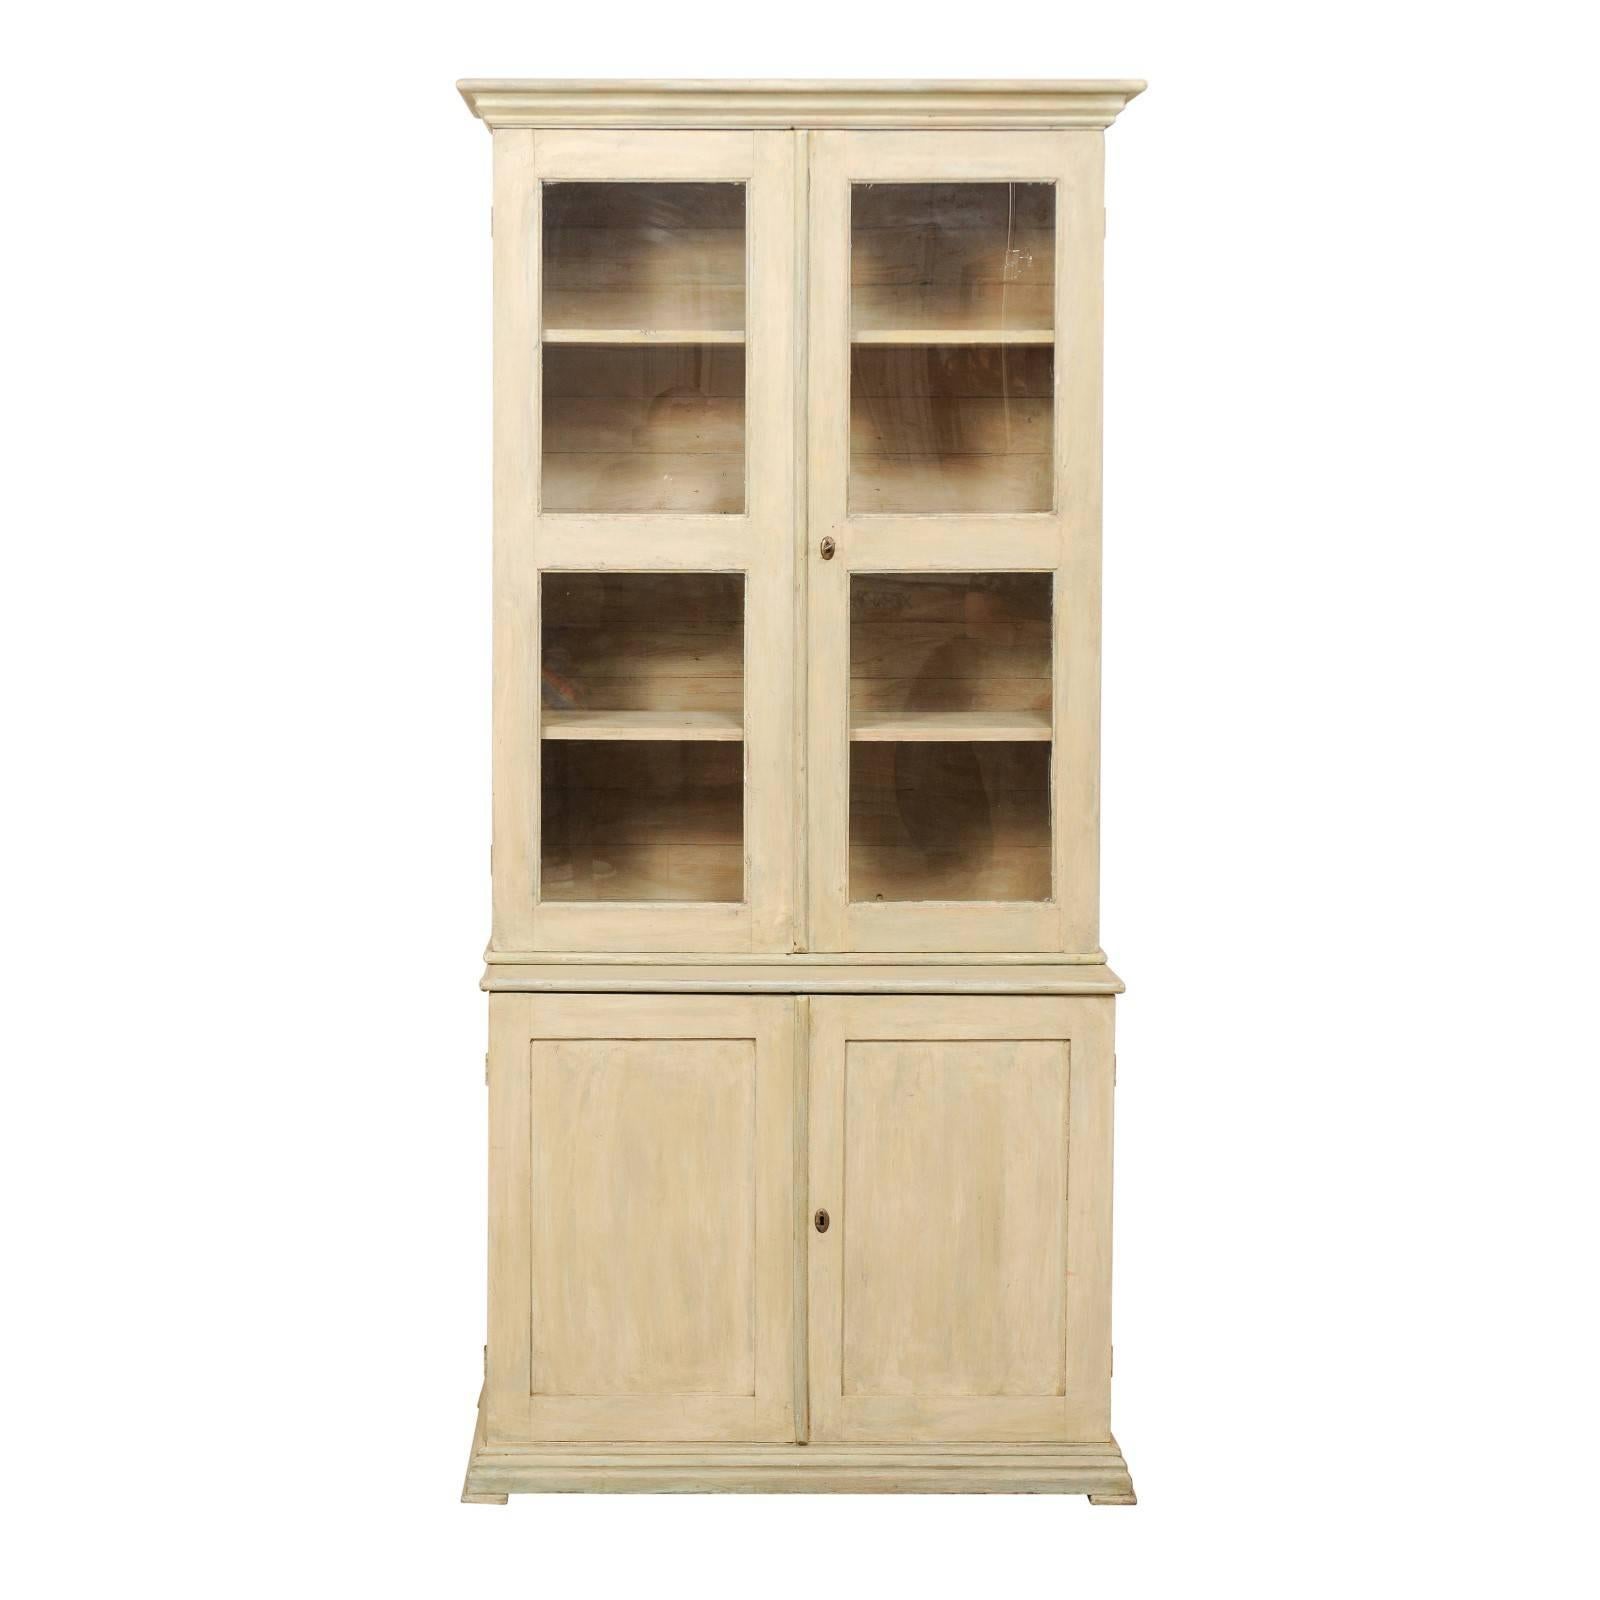 19th Century Swedish Painted Wood Bookcase with Glass Doors and Extra Storage